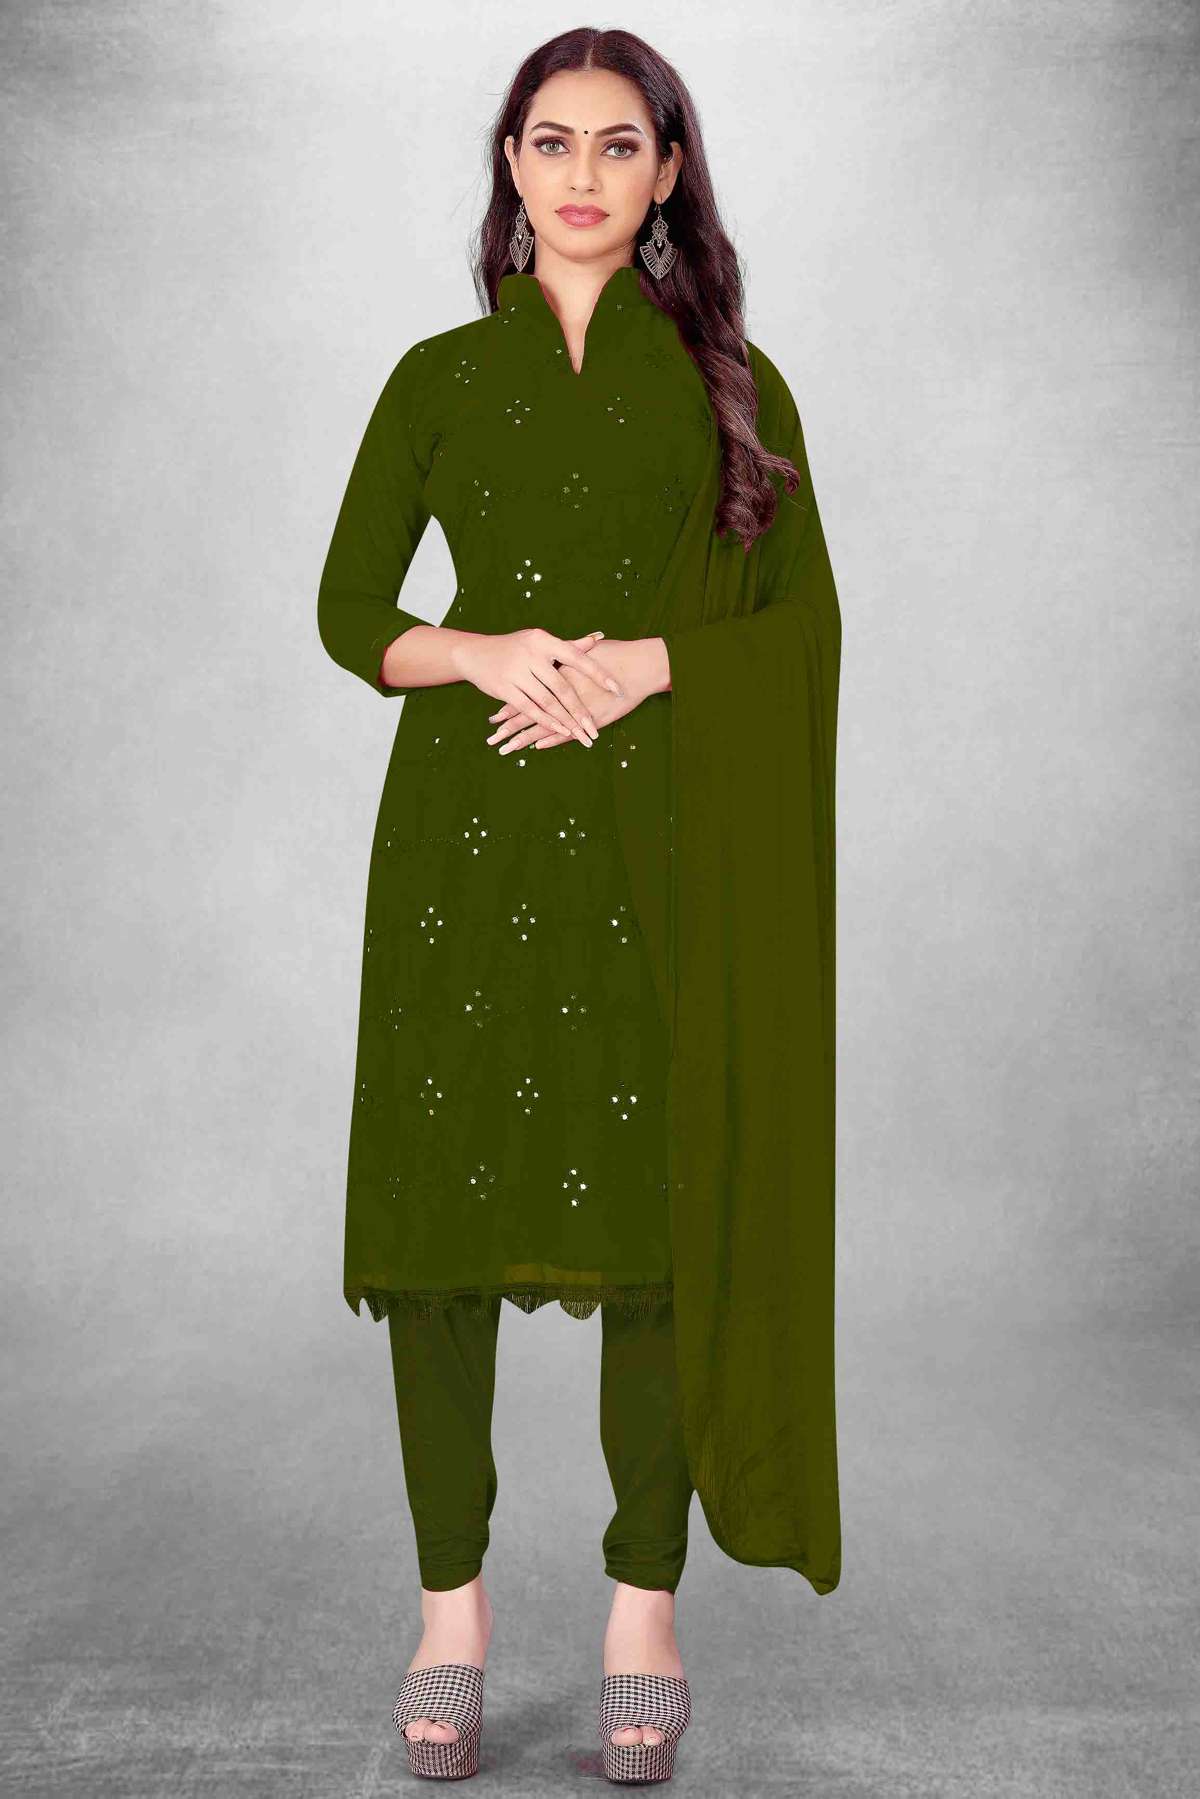 Unstitched Georgette Embroidery Churidar Suit In Mehendi Green Colour - US3234471